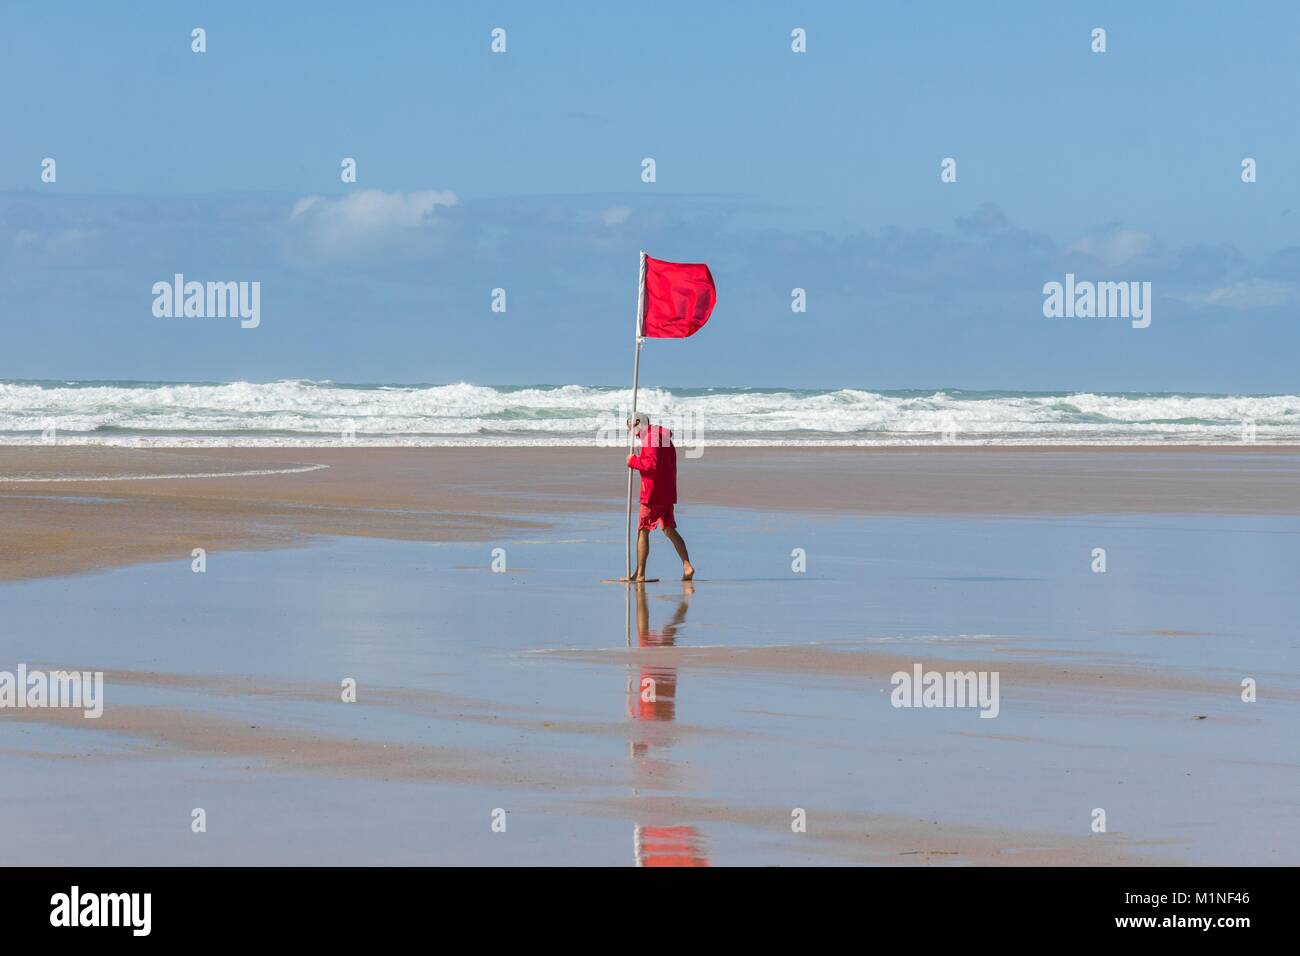 A Cornish lifeguard positioning a red flag to warn swimmers and surfers of hazardous conditions on Mawgan Porth beach, Cornwall, England, UK. Stock Photo